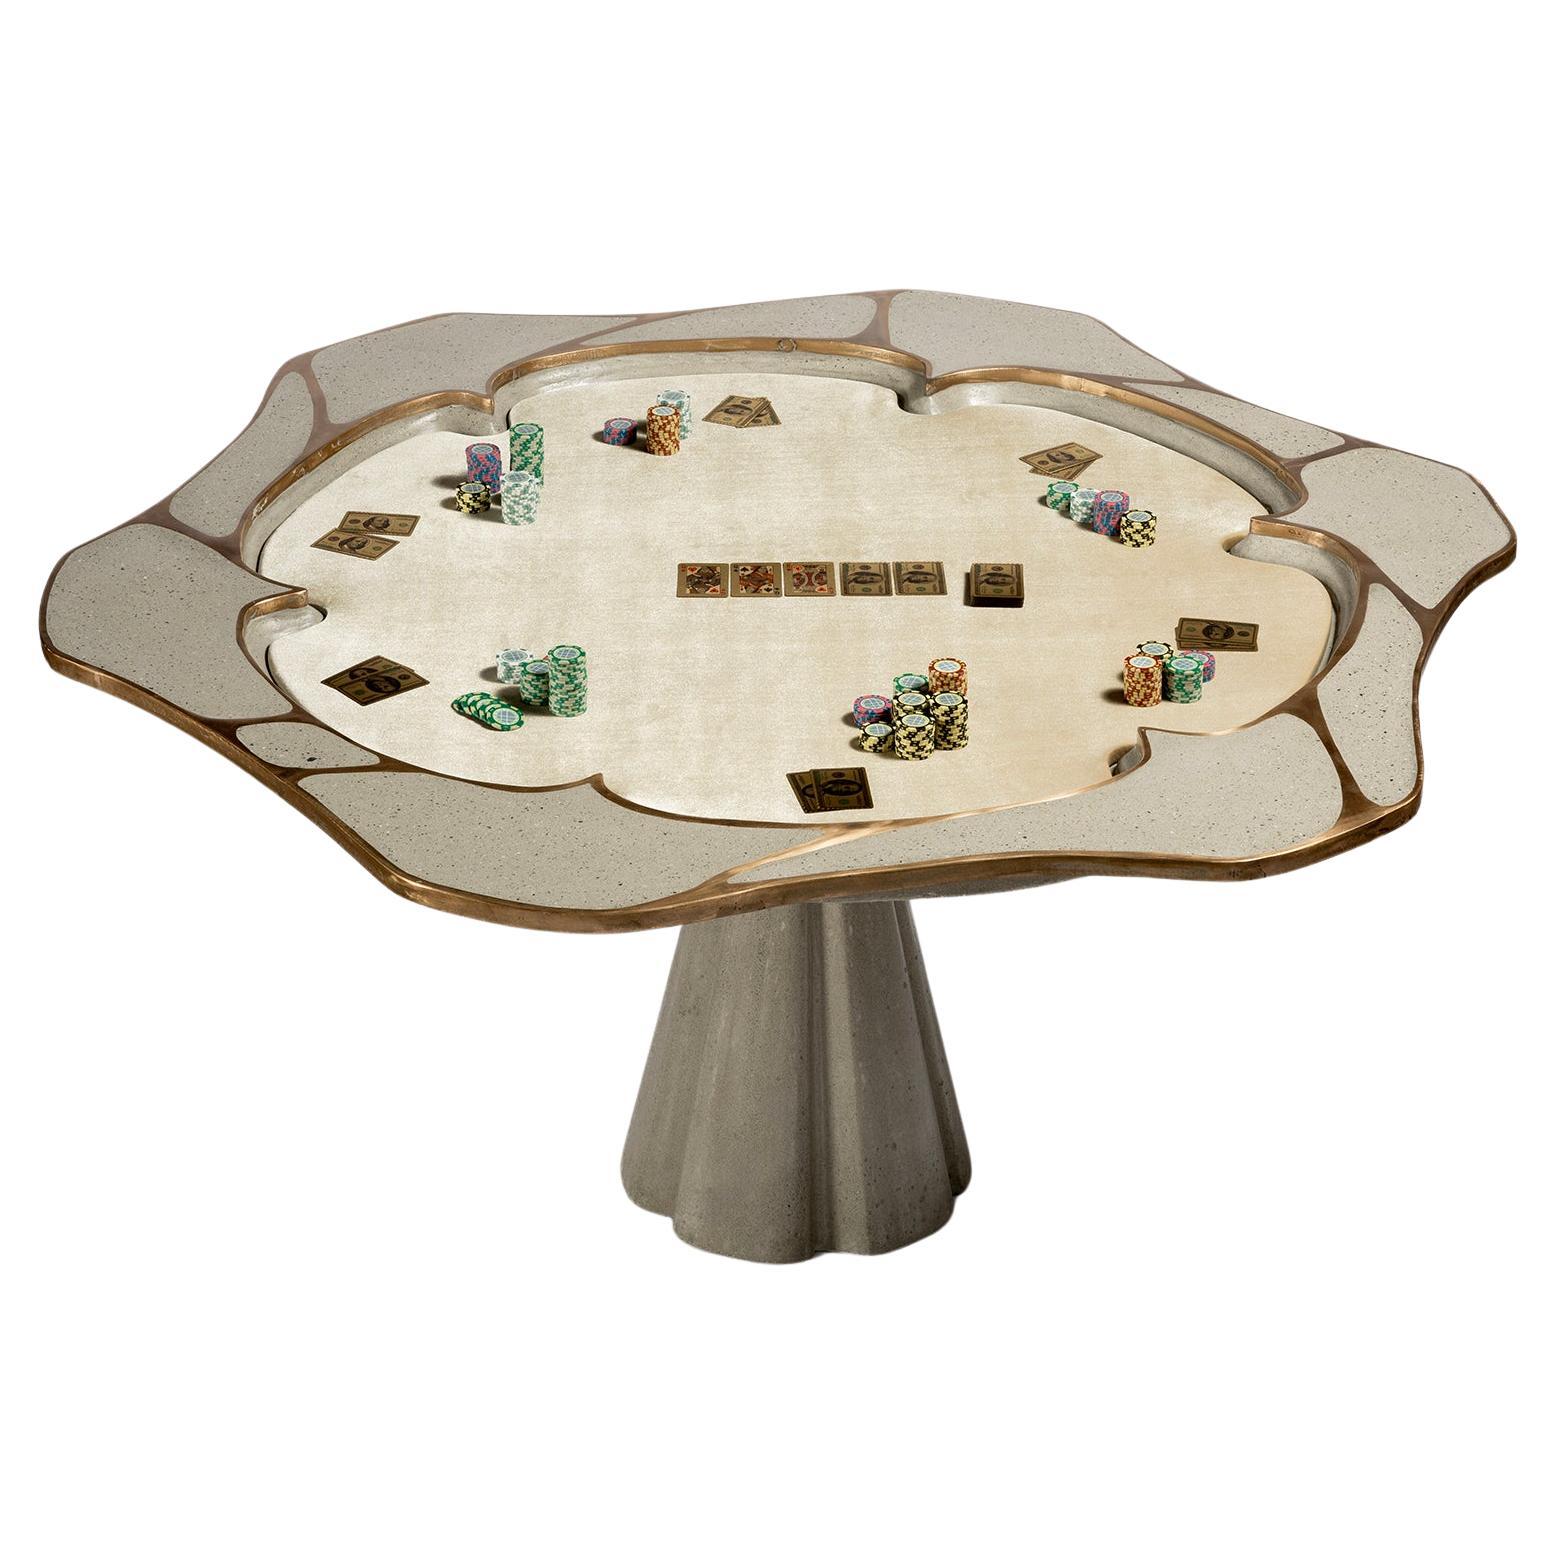 James de Wulf Exo Imperial Poker Table For Sale